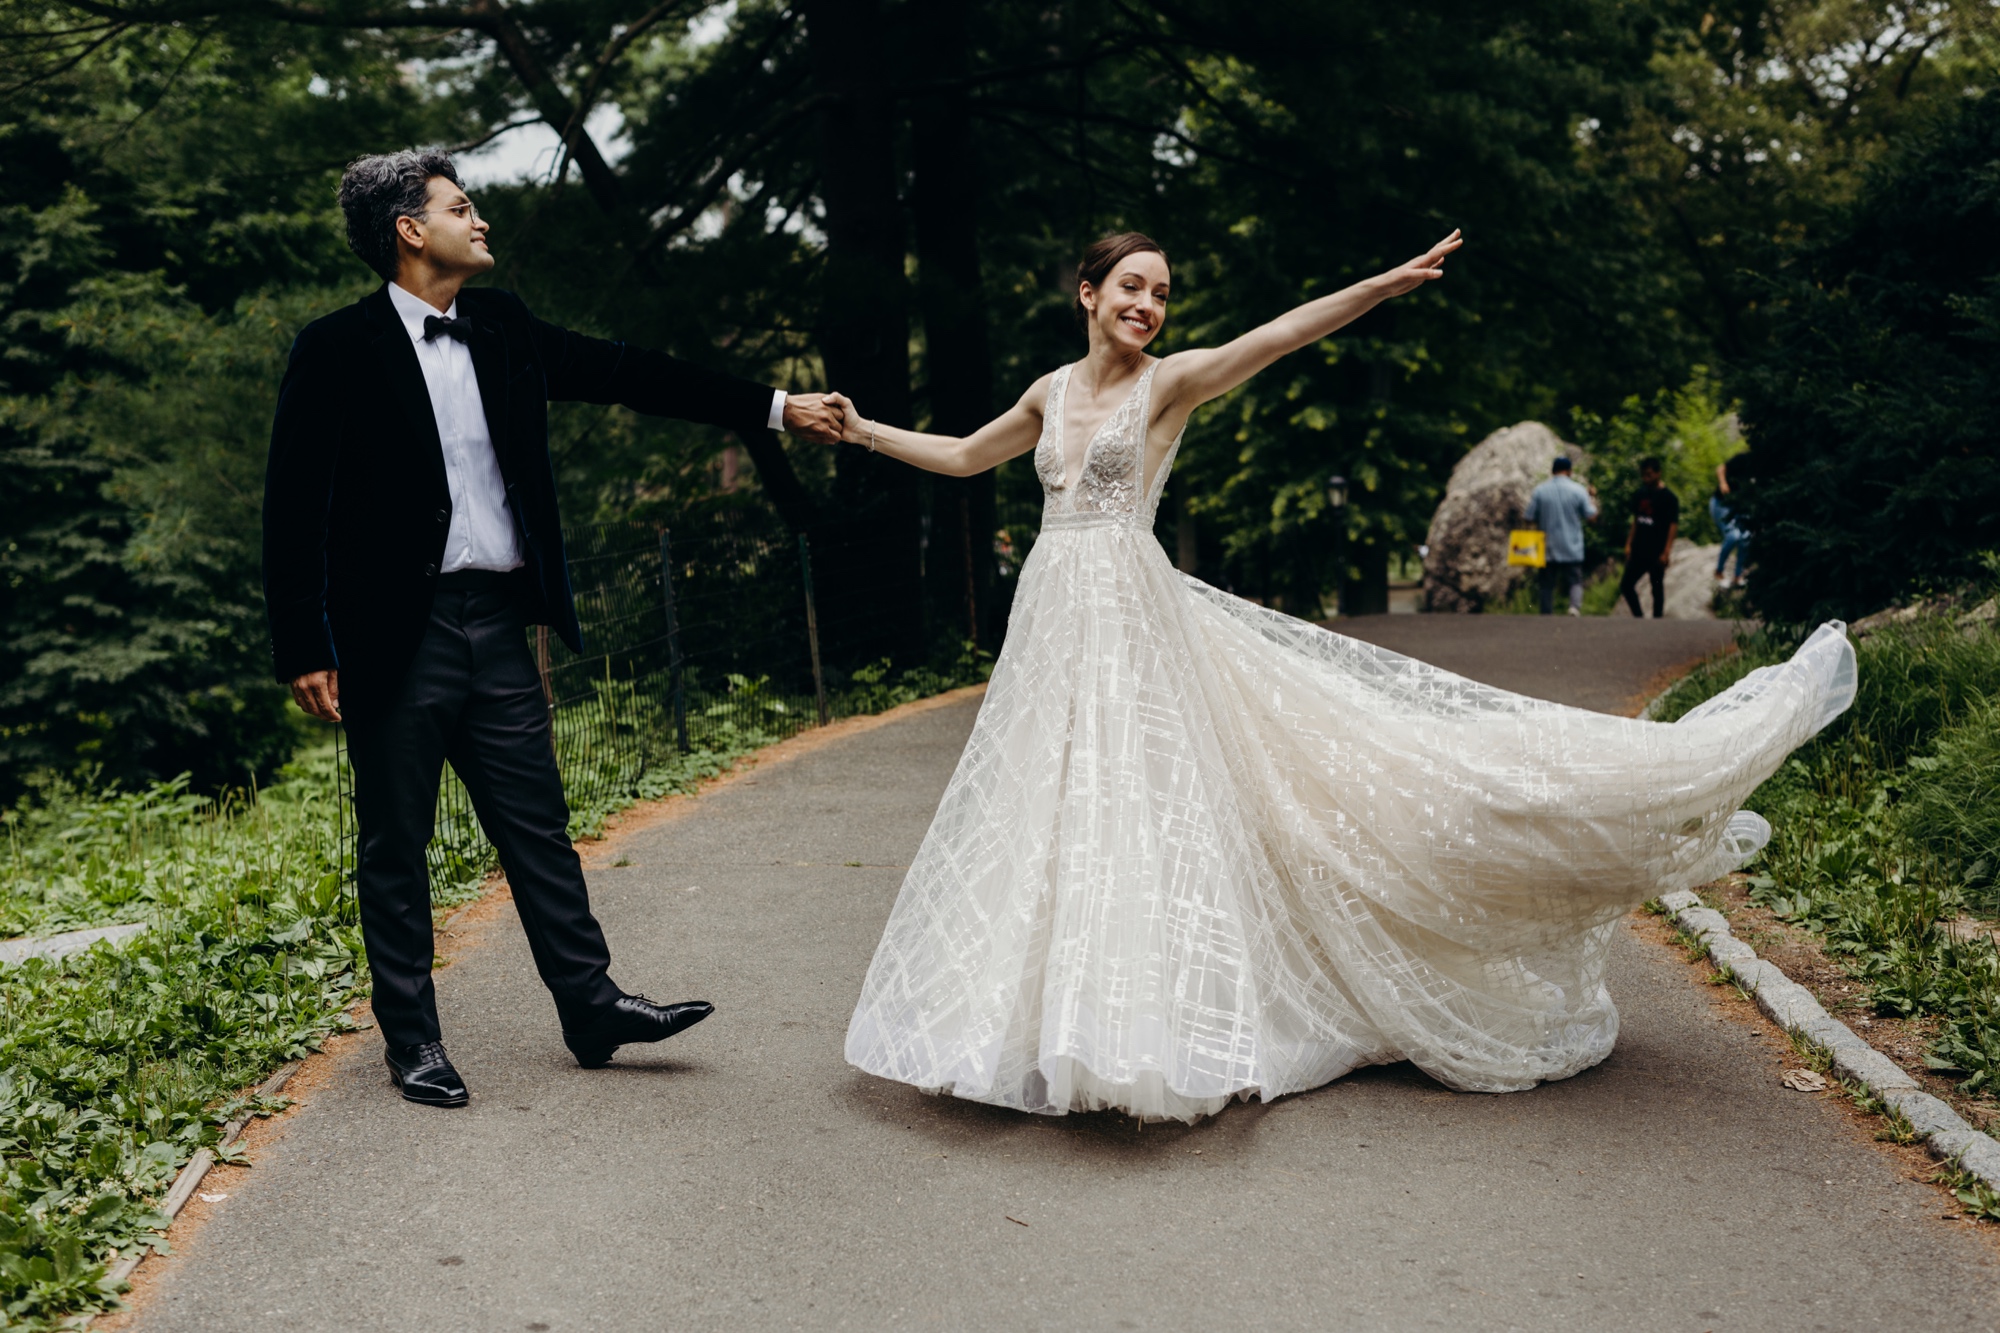 portrait of a bride and groom on their wedding day in central park, new york city